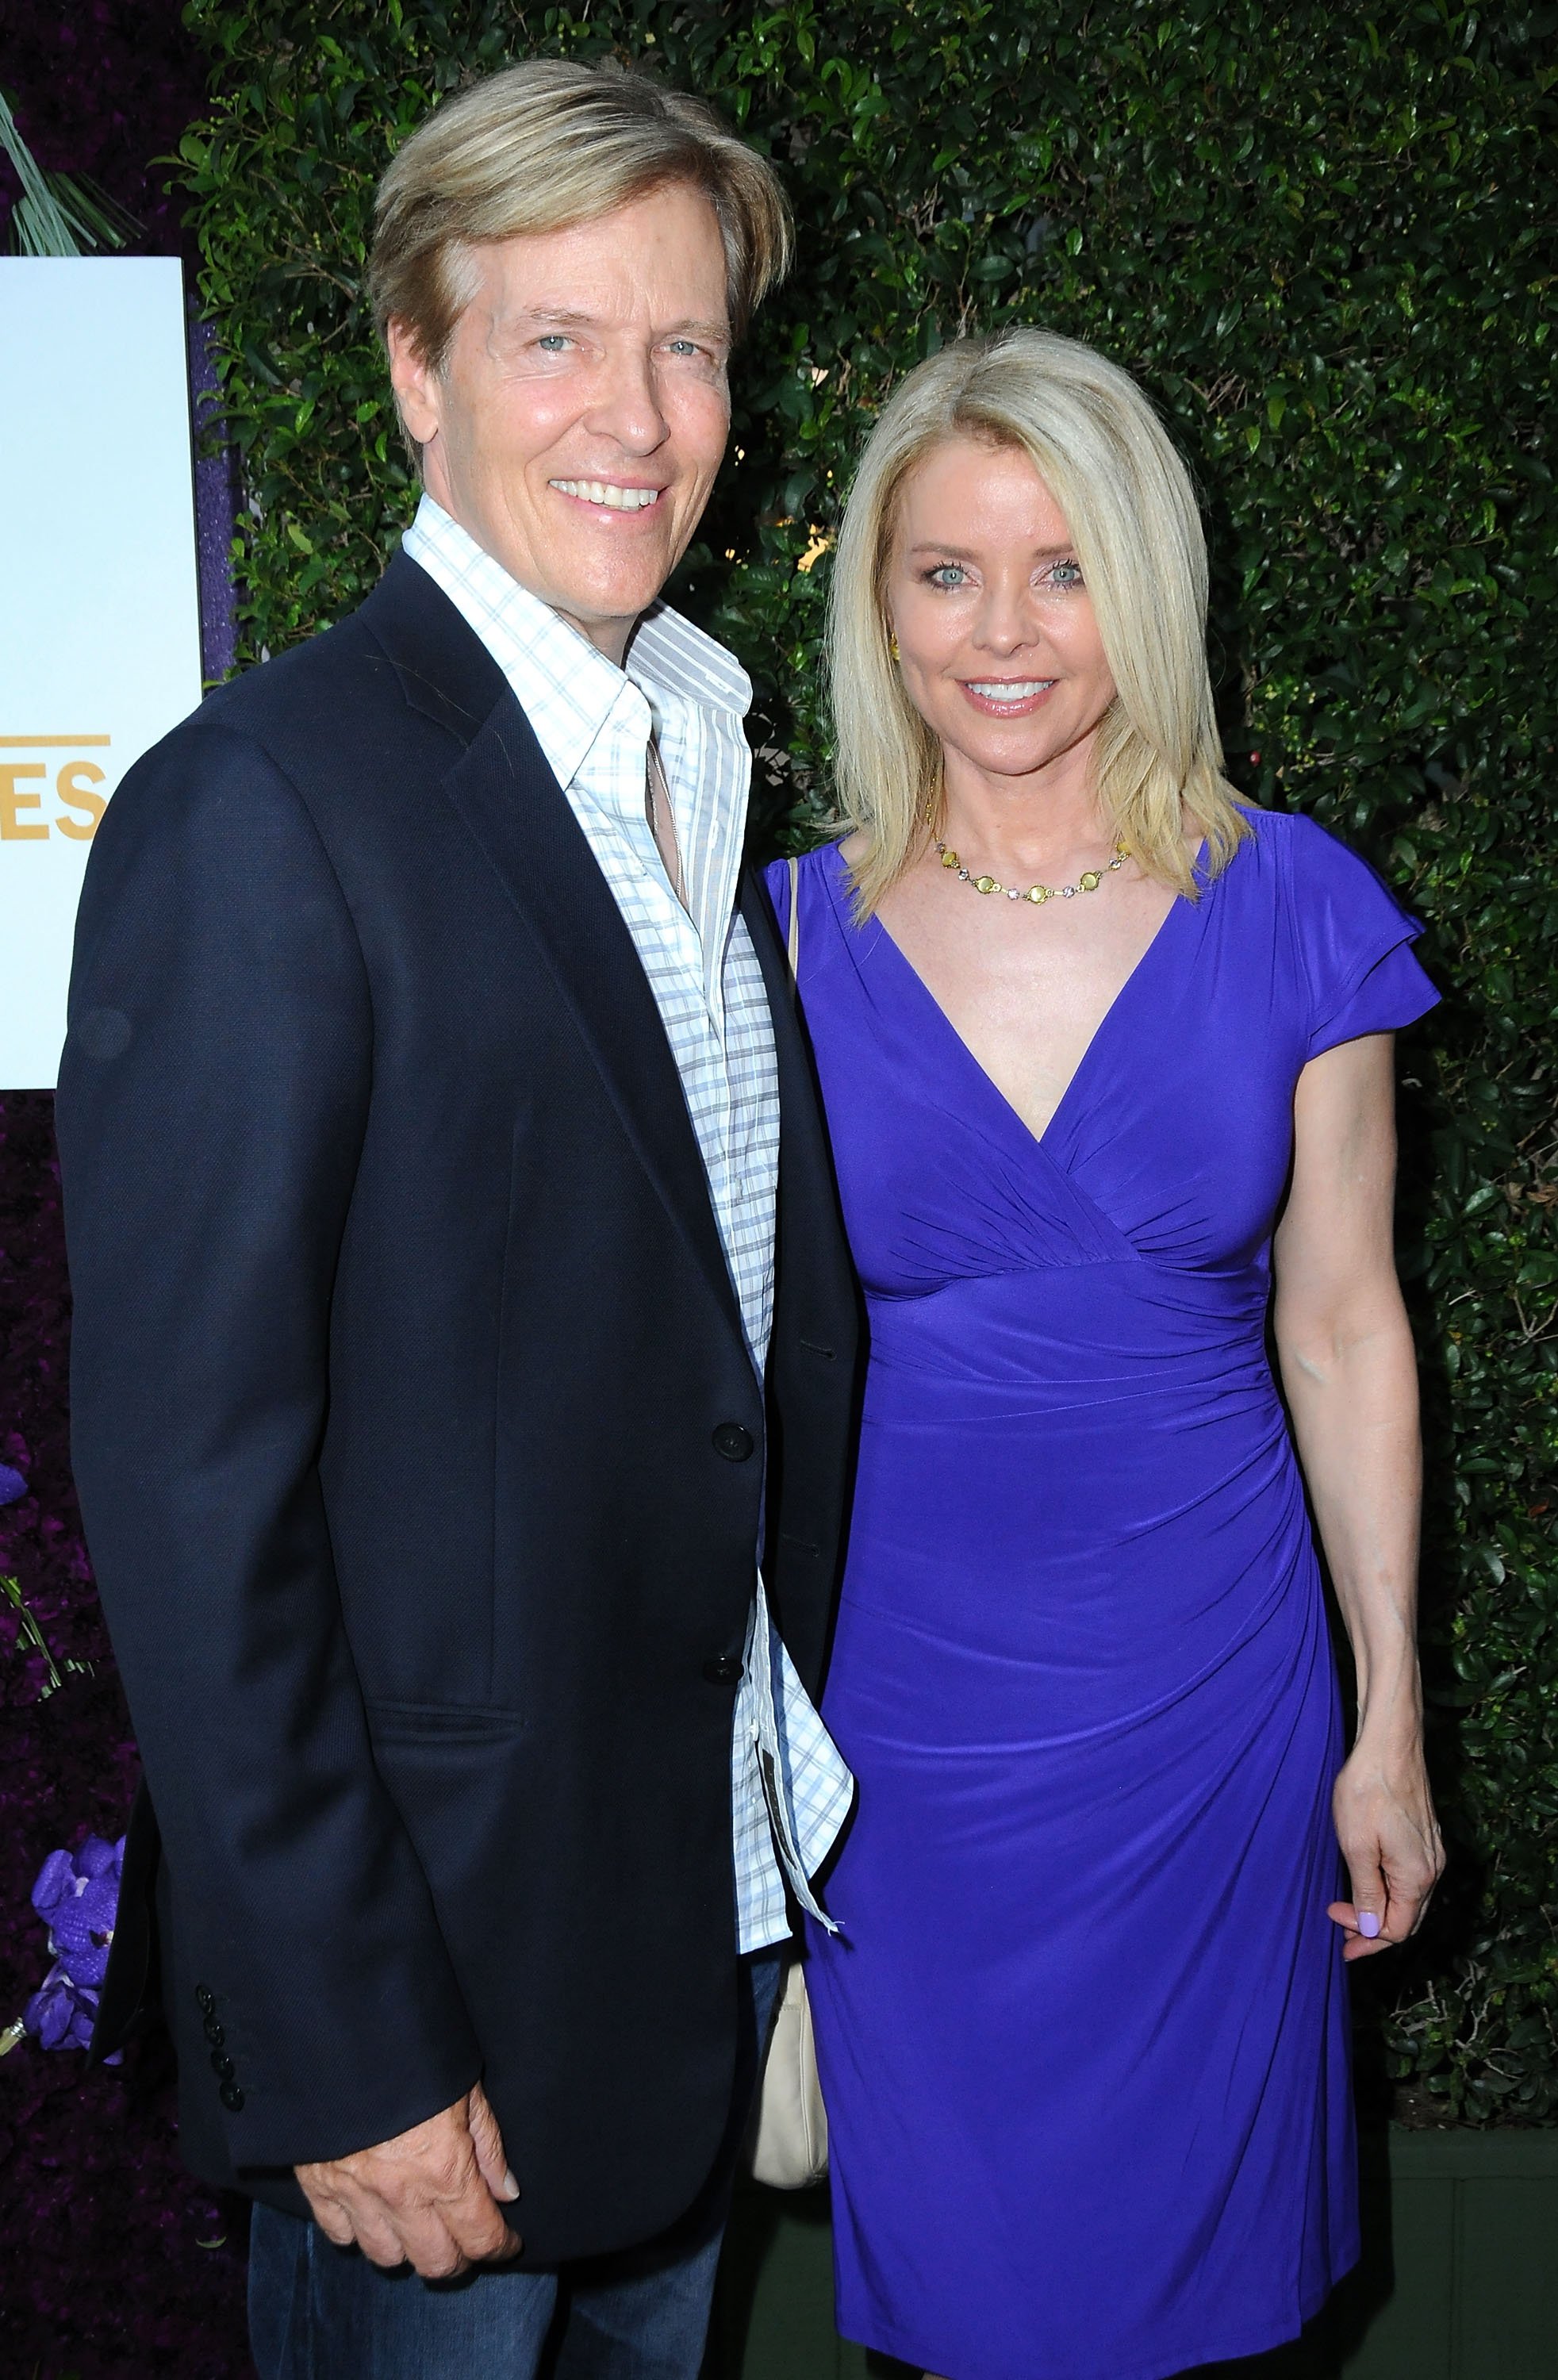 Jack Wagner and Kristina Wagner on July 29, 2015 in Beverly Hills, California | Source: Getty Images